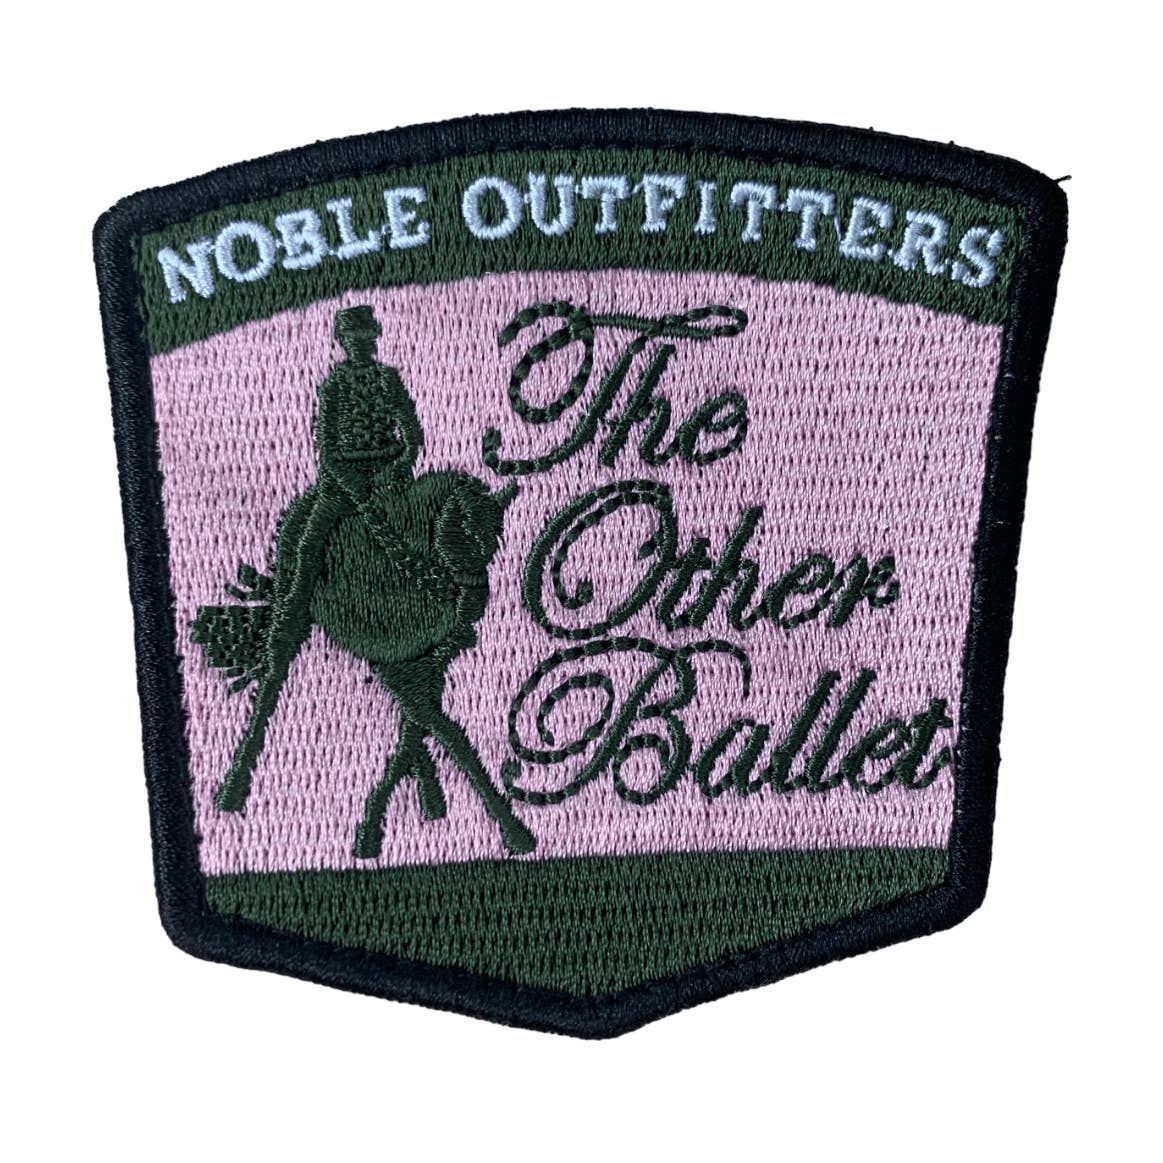 Noble Outfitters 'Trail Blazer' Saddle Bag